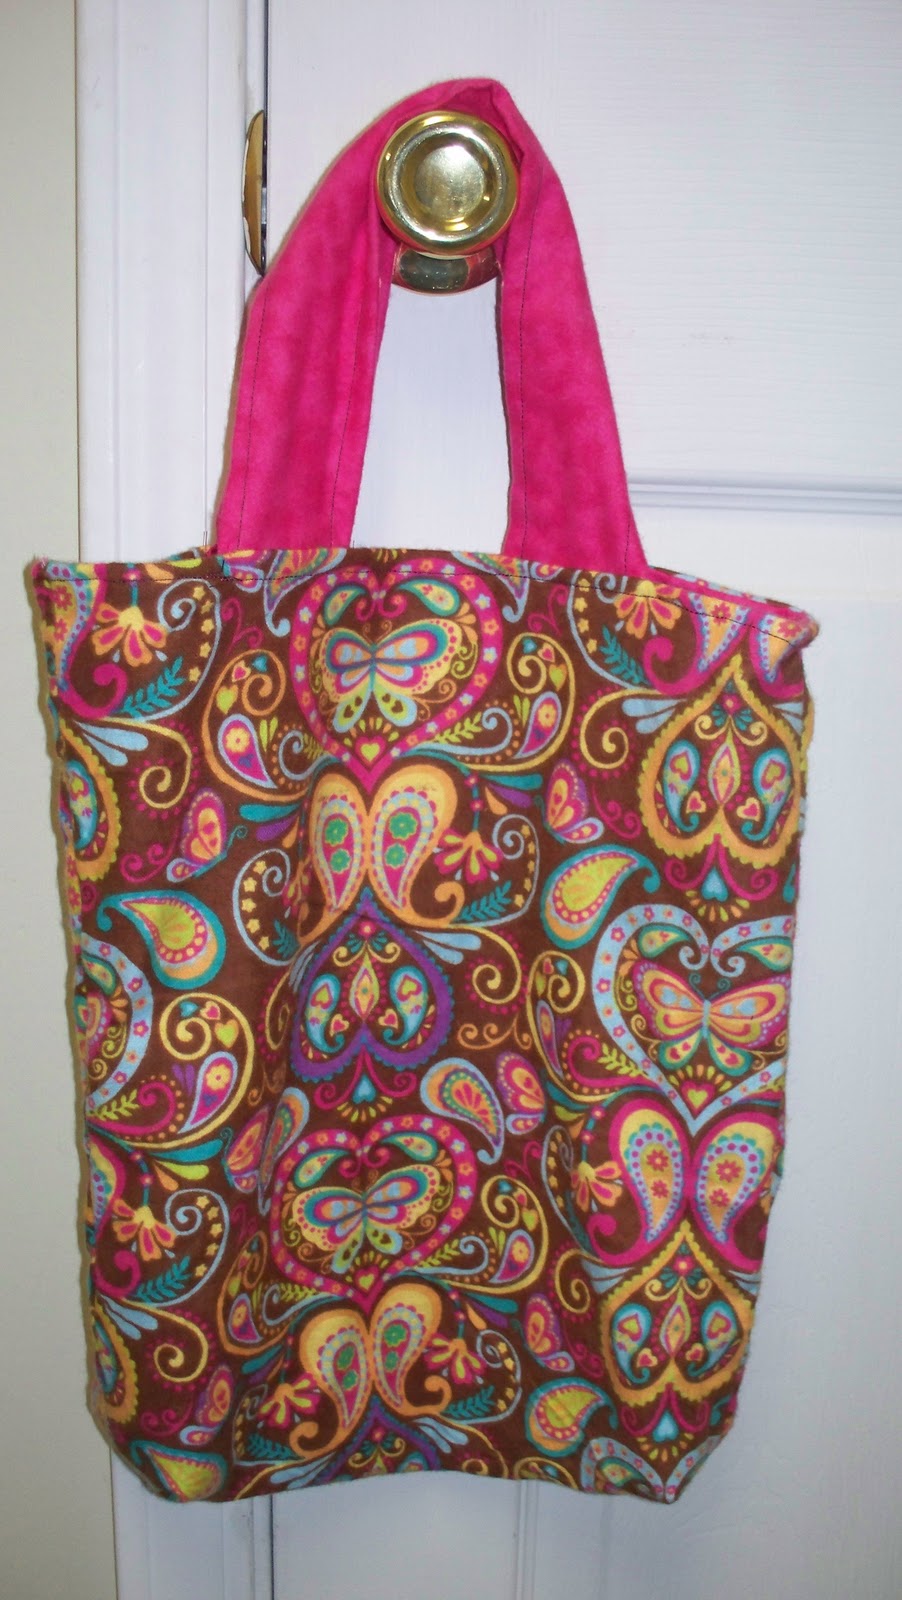 Make Do: Tutorial: How-To Make a Tote Bag (for beginners)